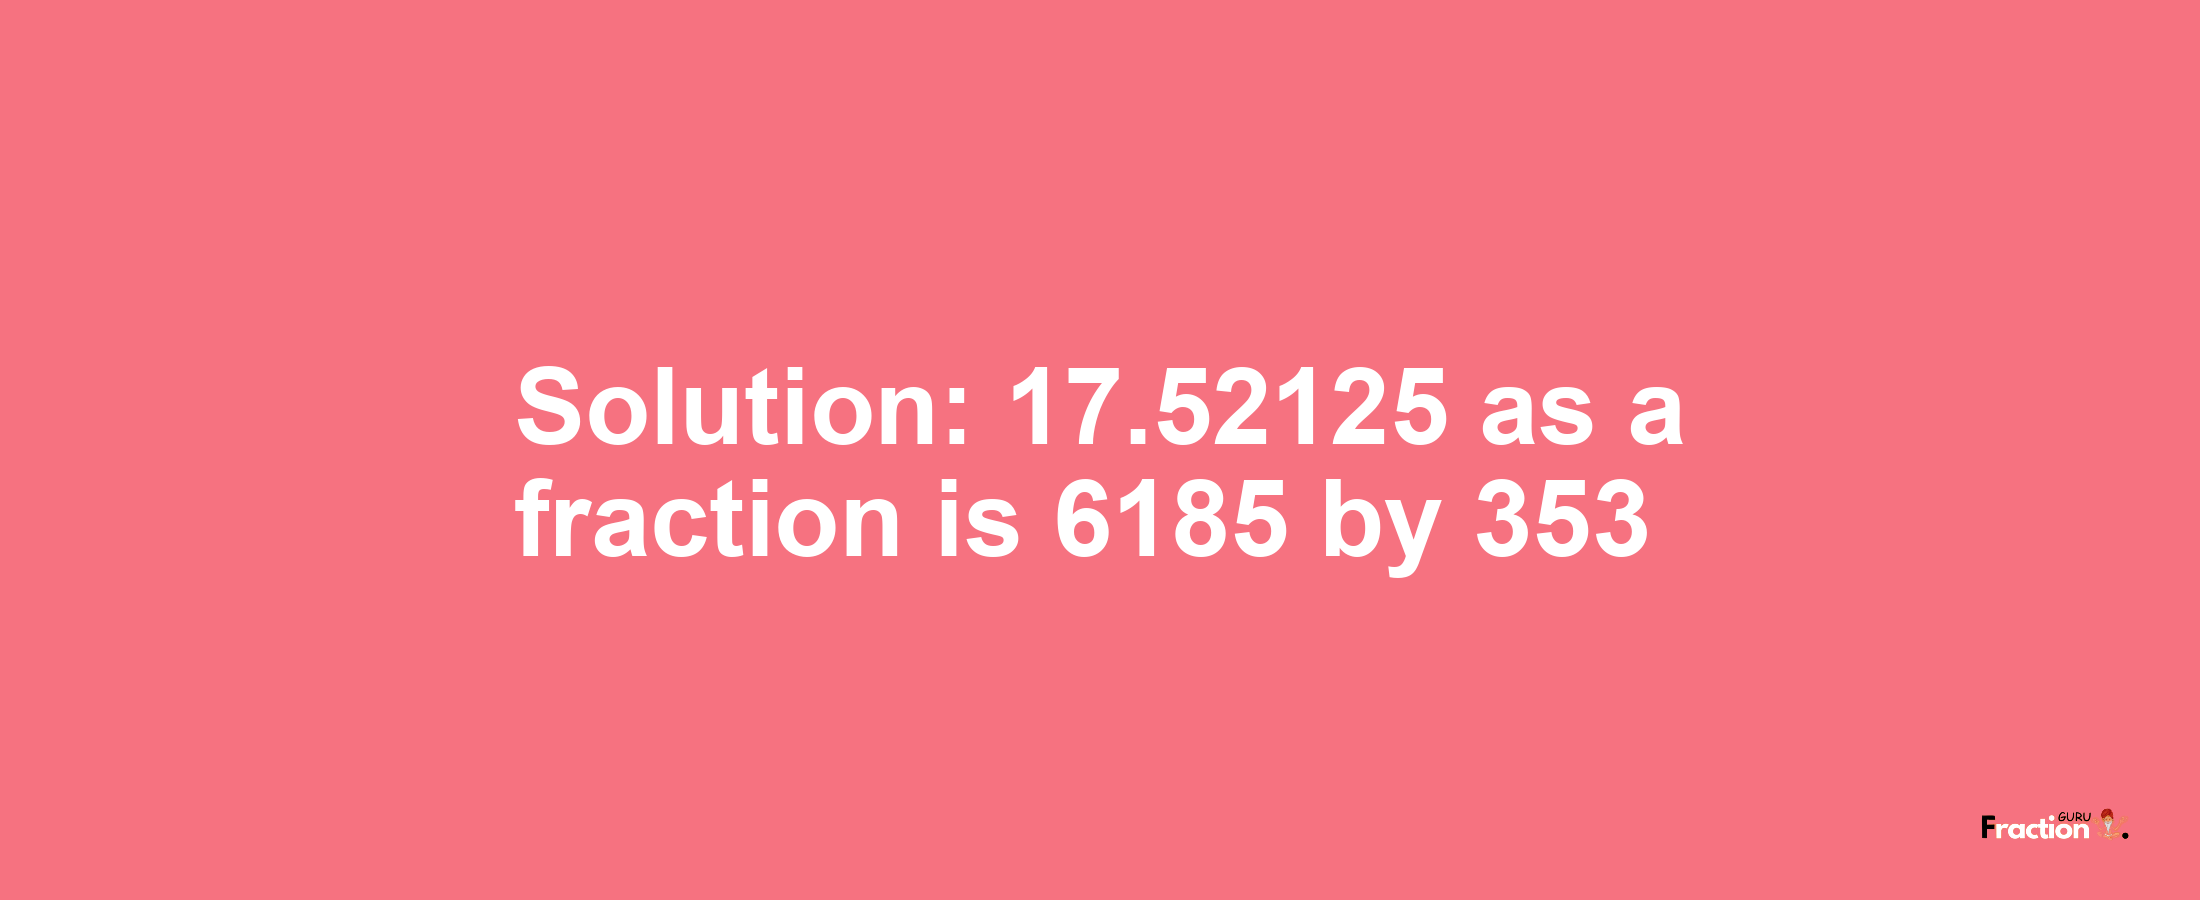 Solution:17.52125 as a fraction is 6185/353